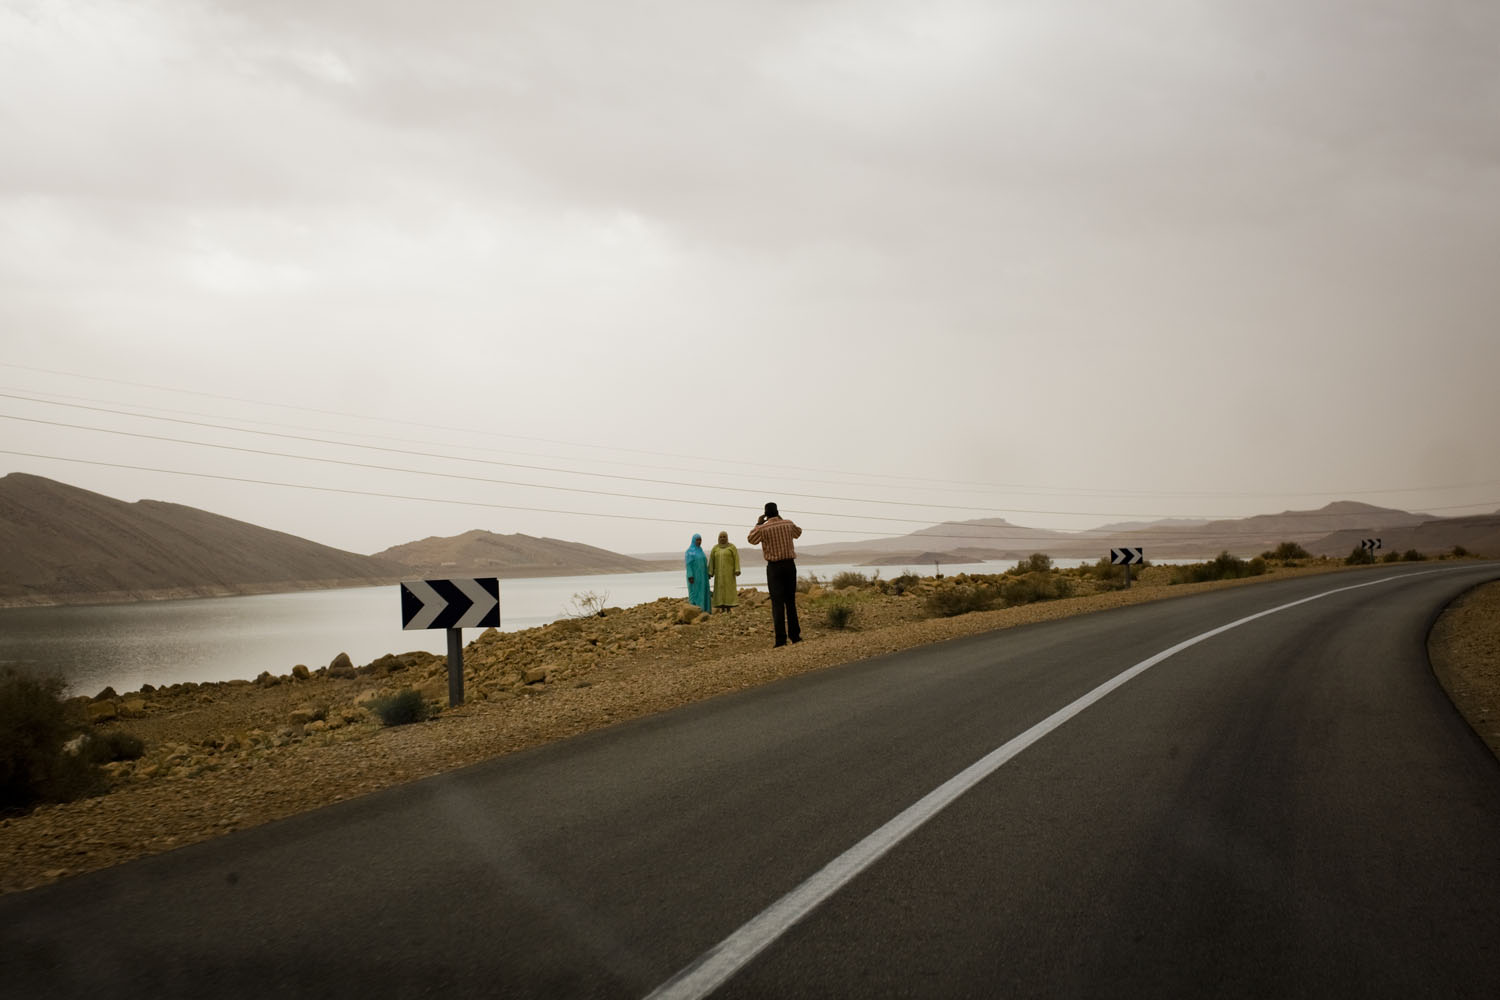 Morocco, 2011. 
                              A man takes a photograph of two women at the side of the road near the Algerian border.